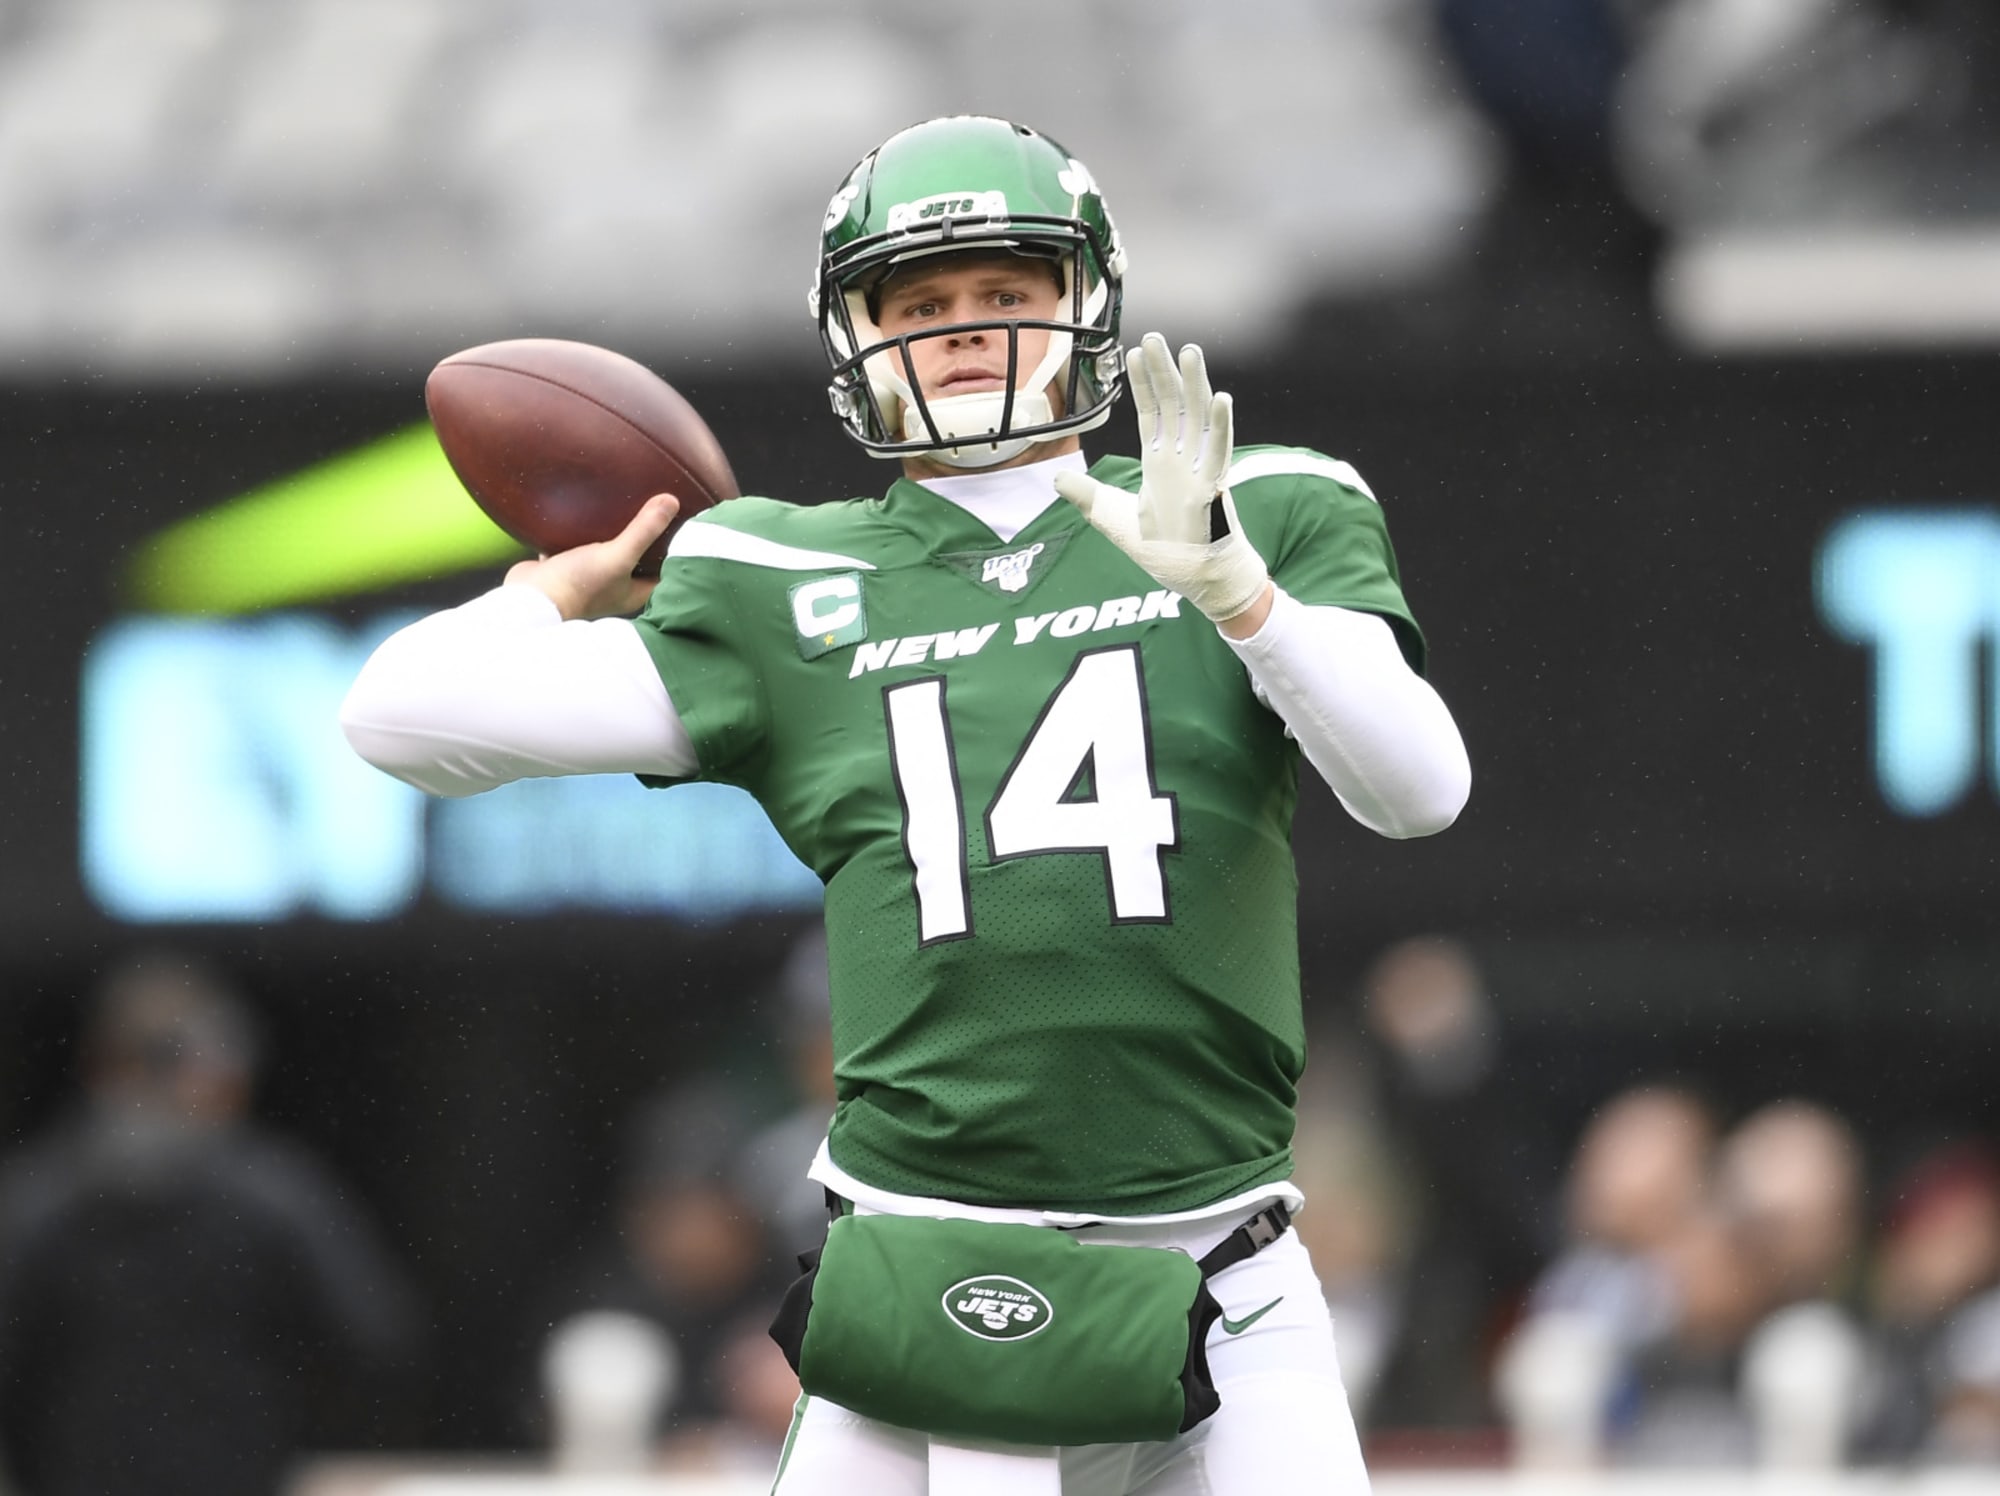 New York Jets: Sam Darnold has found his groove this season